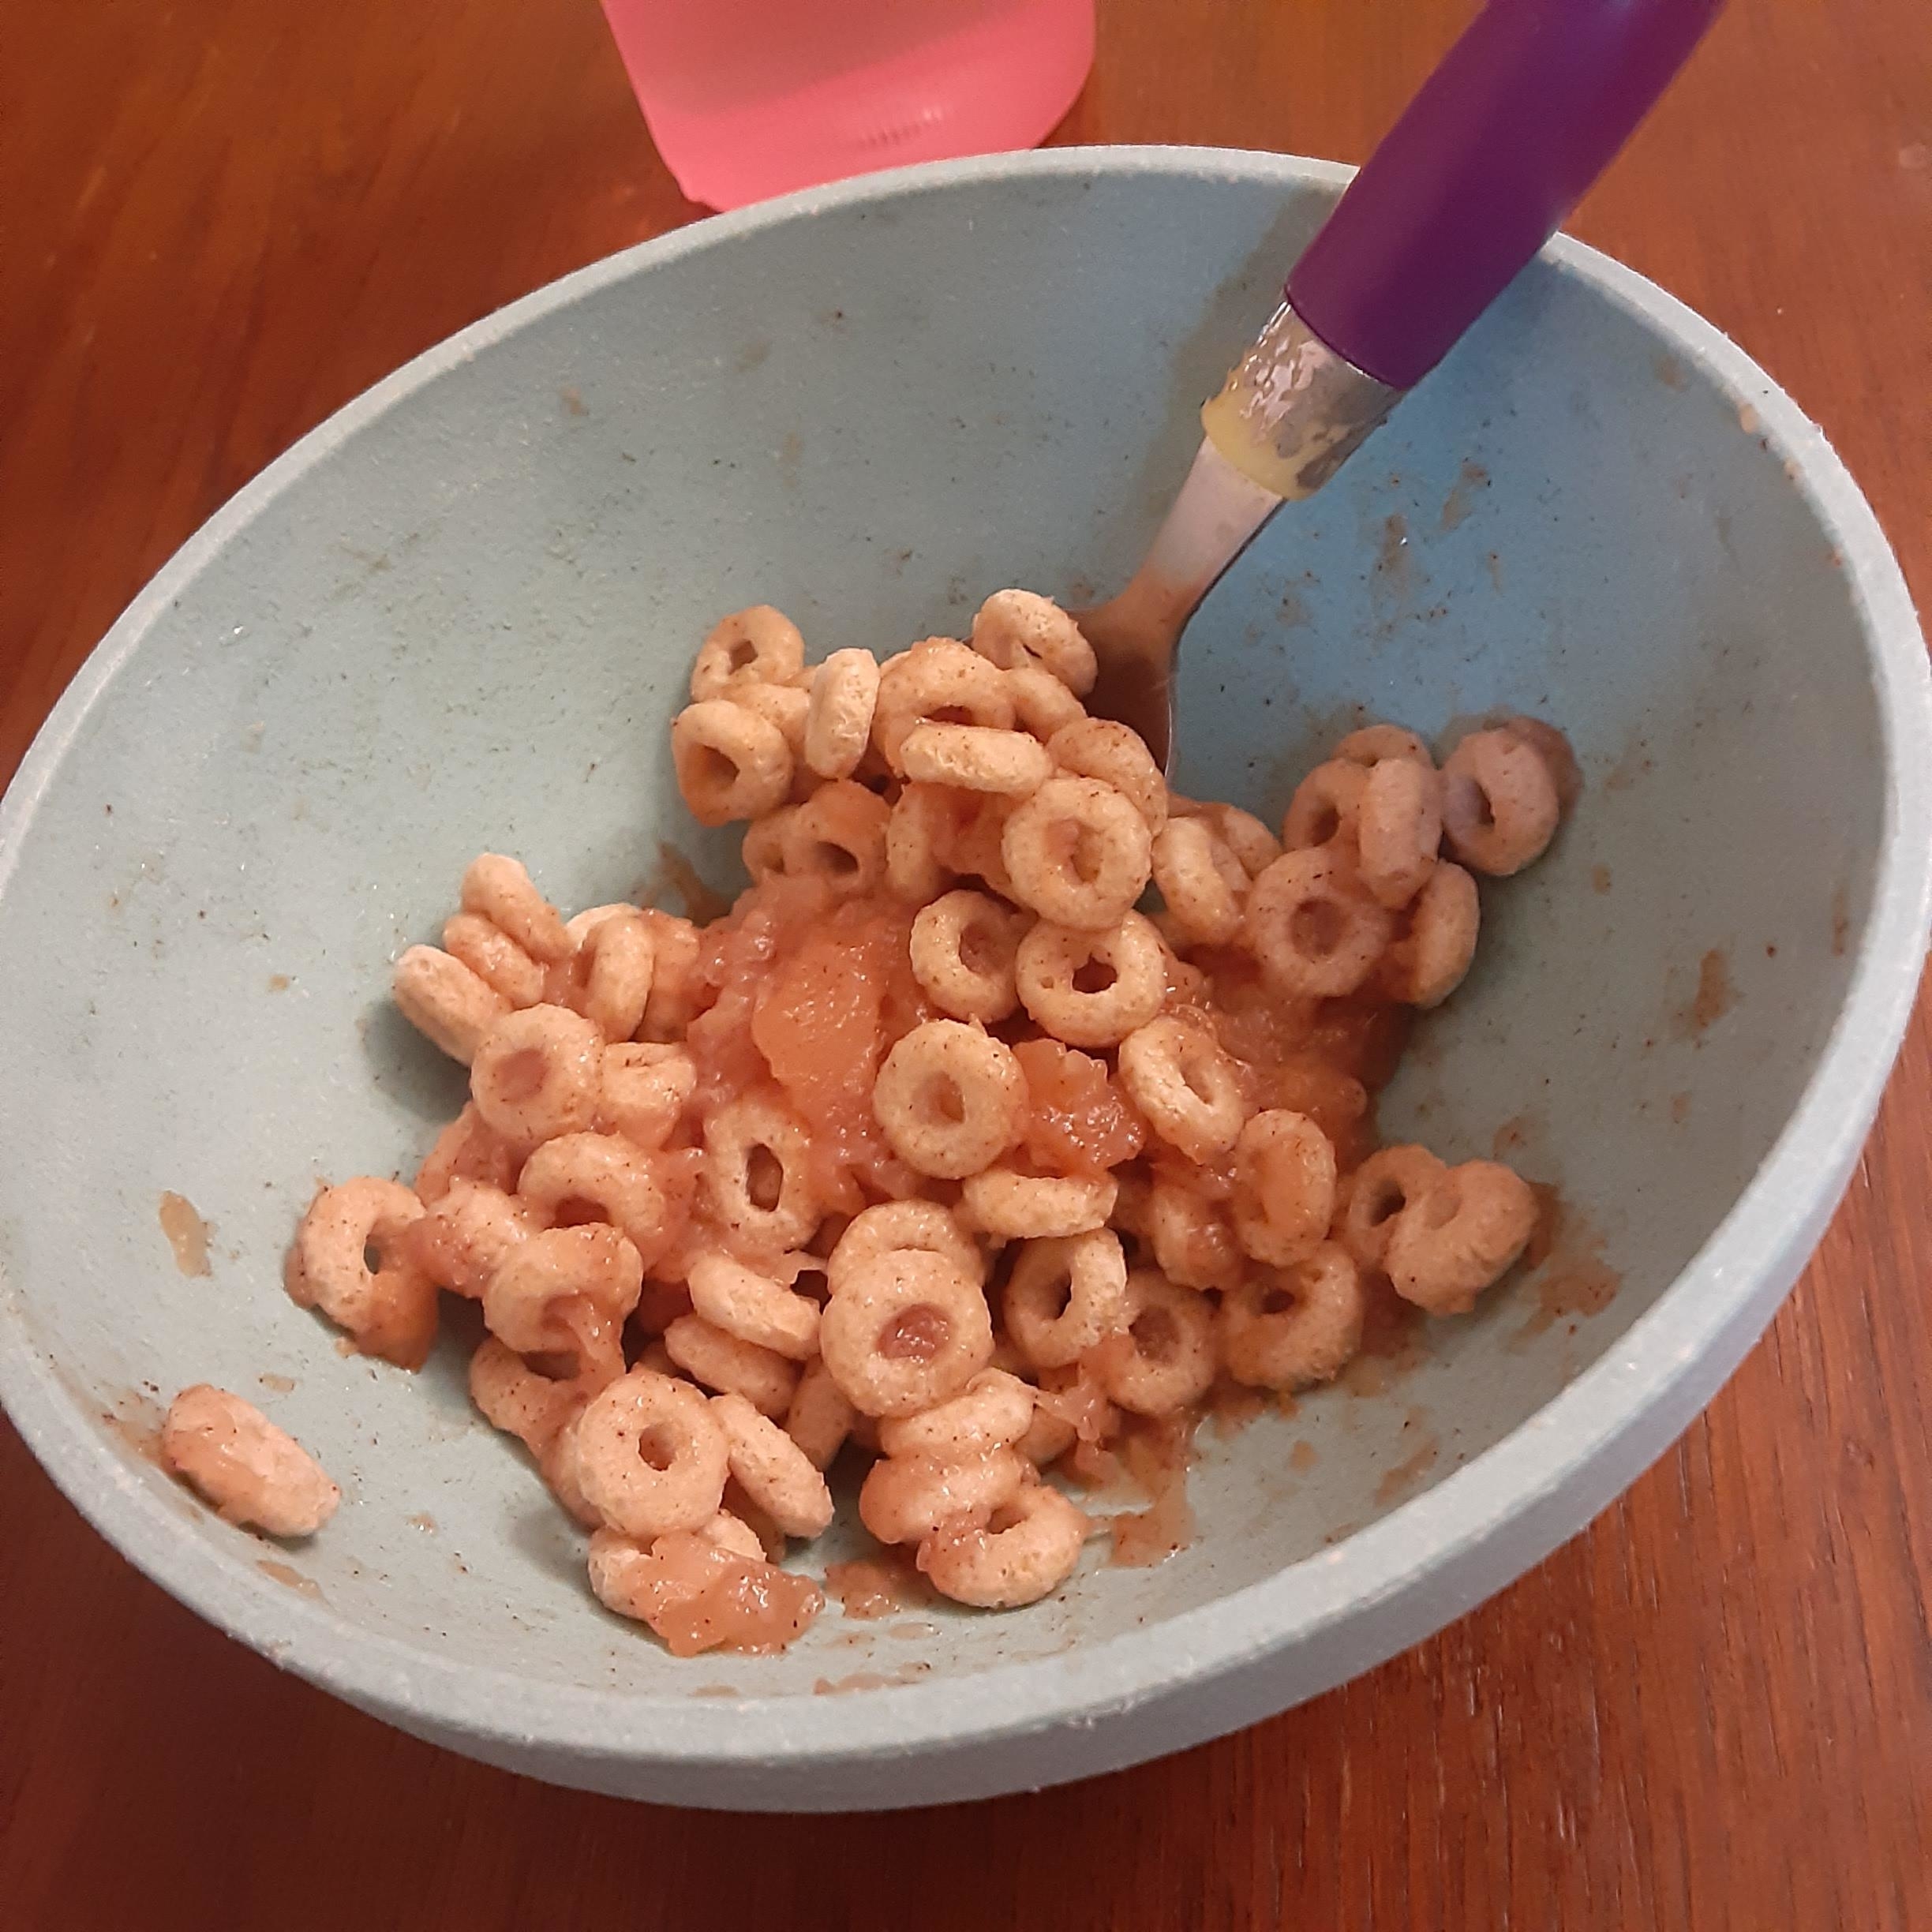 A bowl of cereal with applesauce and a spoon, partially eaten